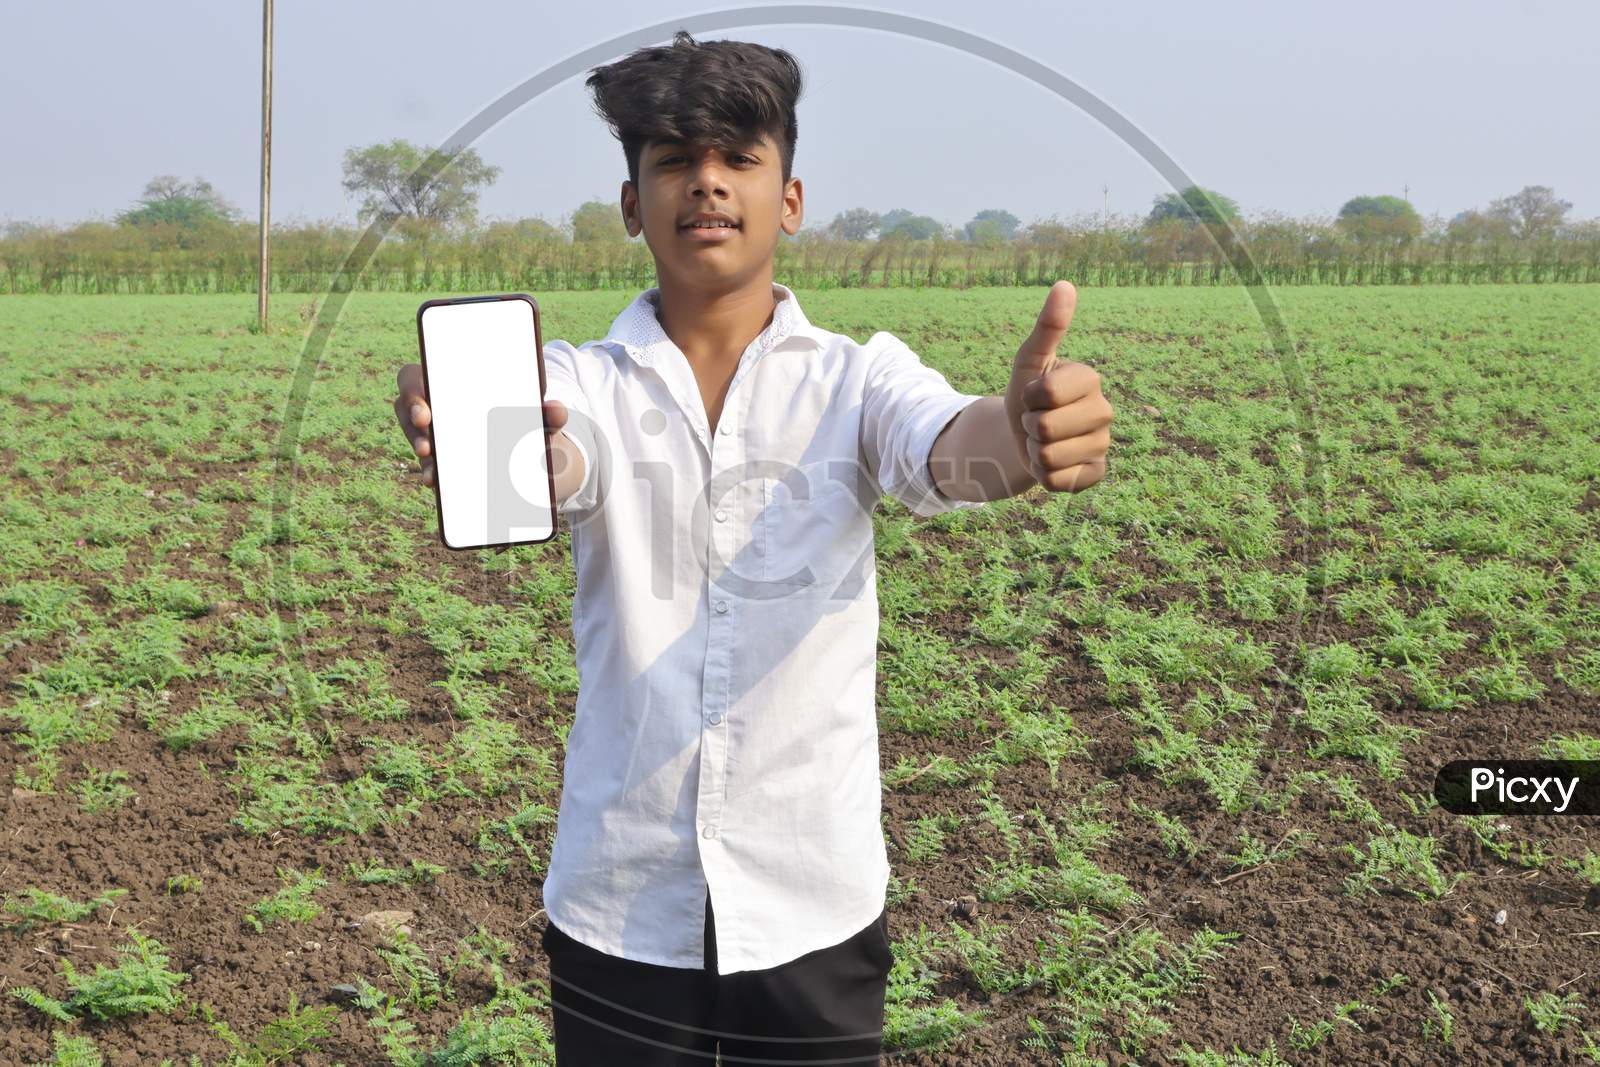 Indian Little Child Showing Smartphone Screen At Agriculture Field.